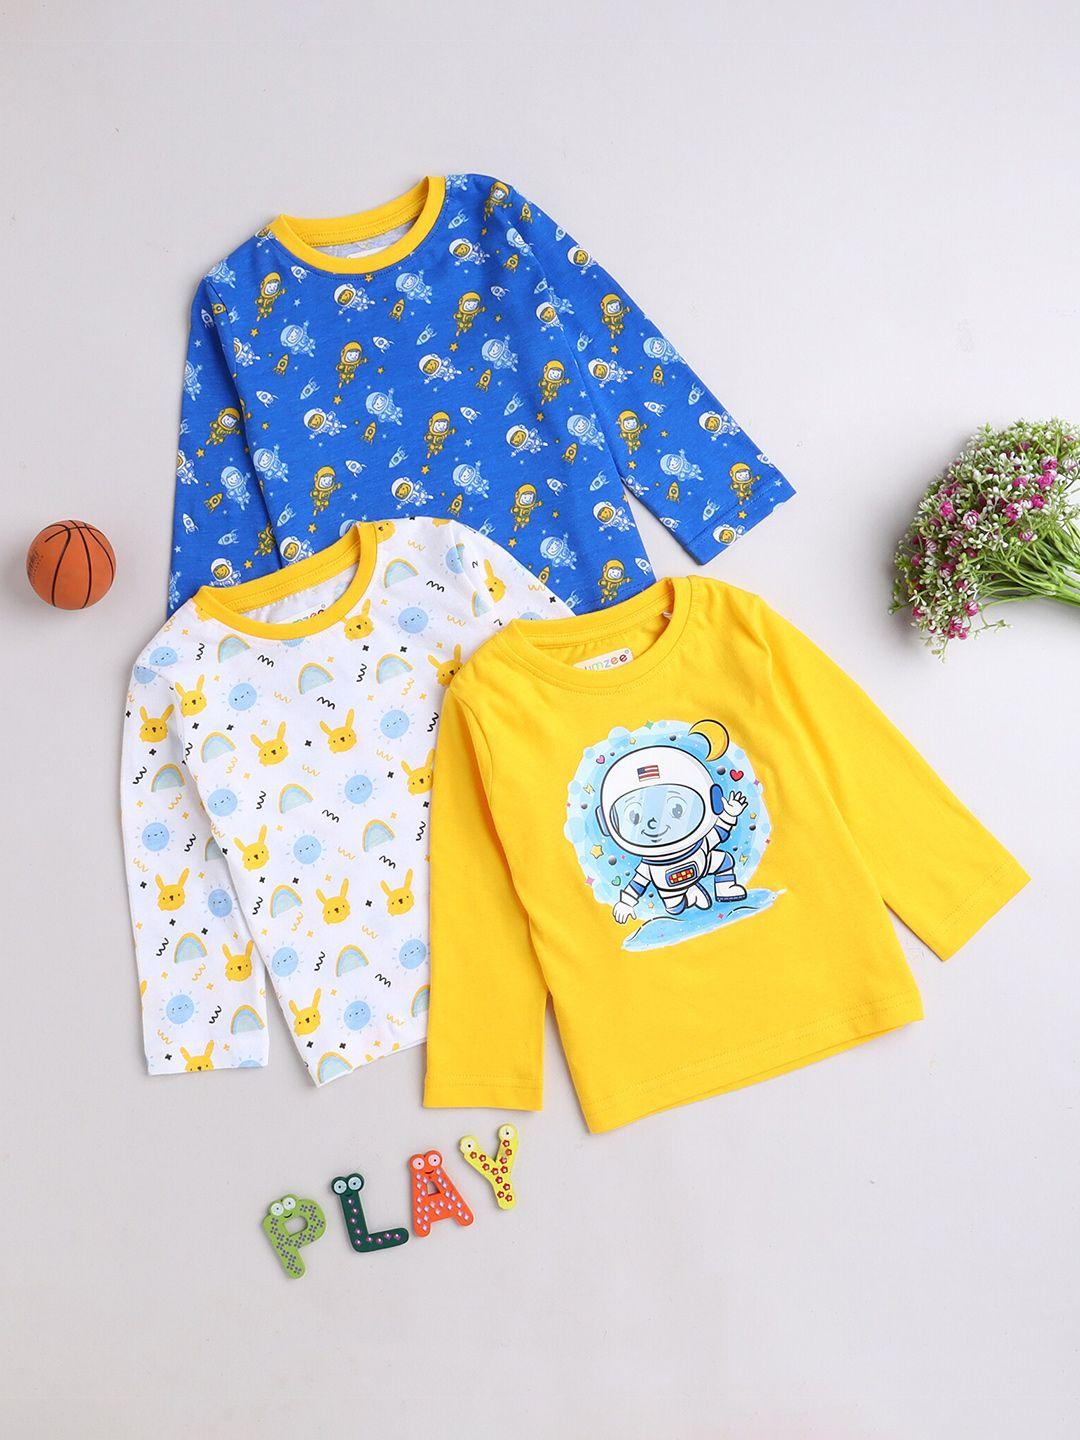 bumzee-boys-yellow-&-blue-pack-of-3-printed-t-shirt